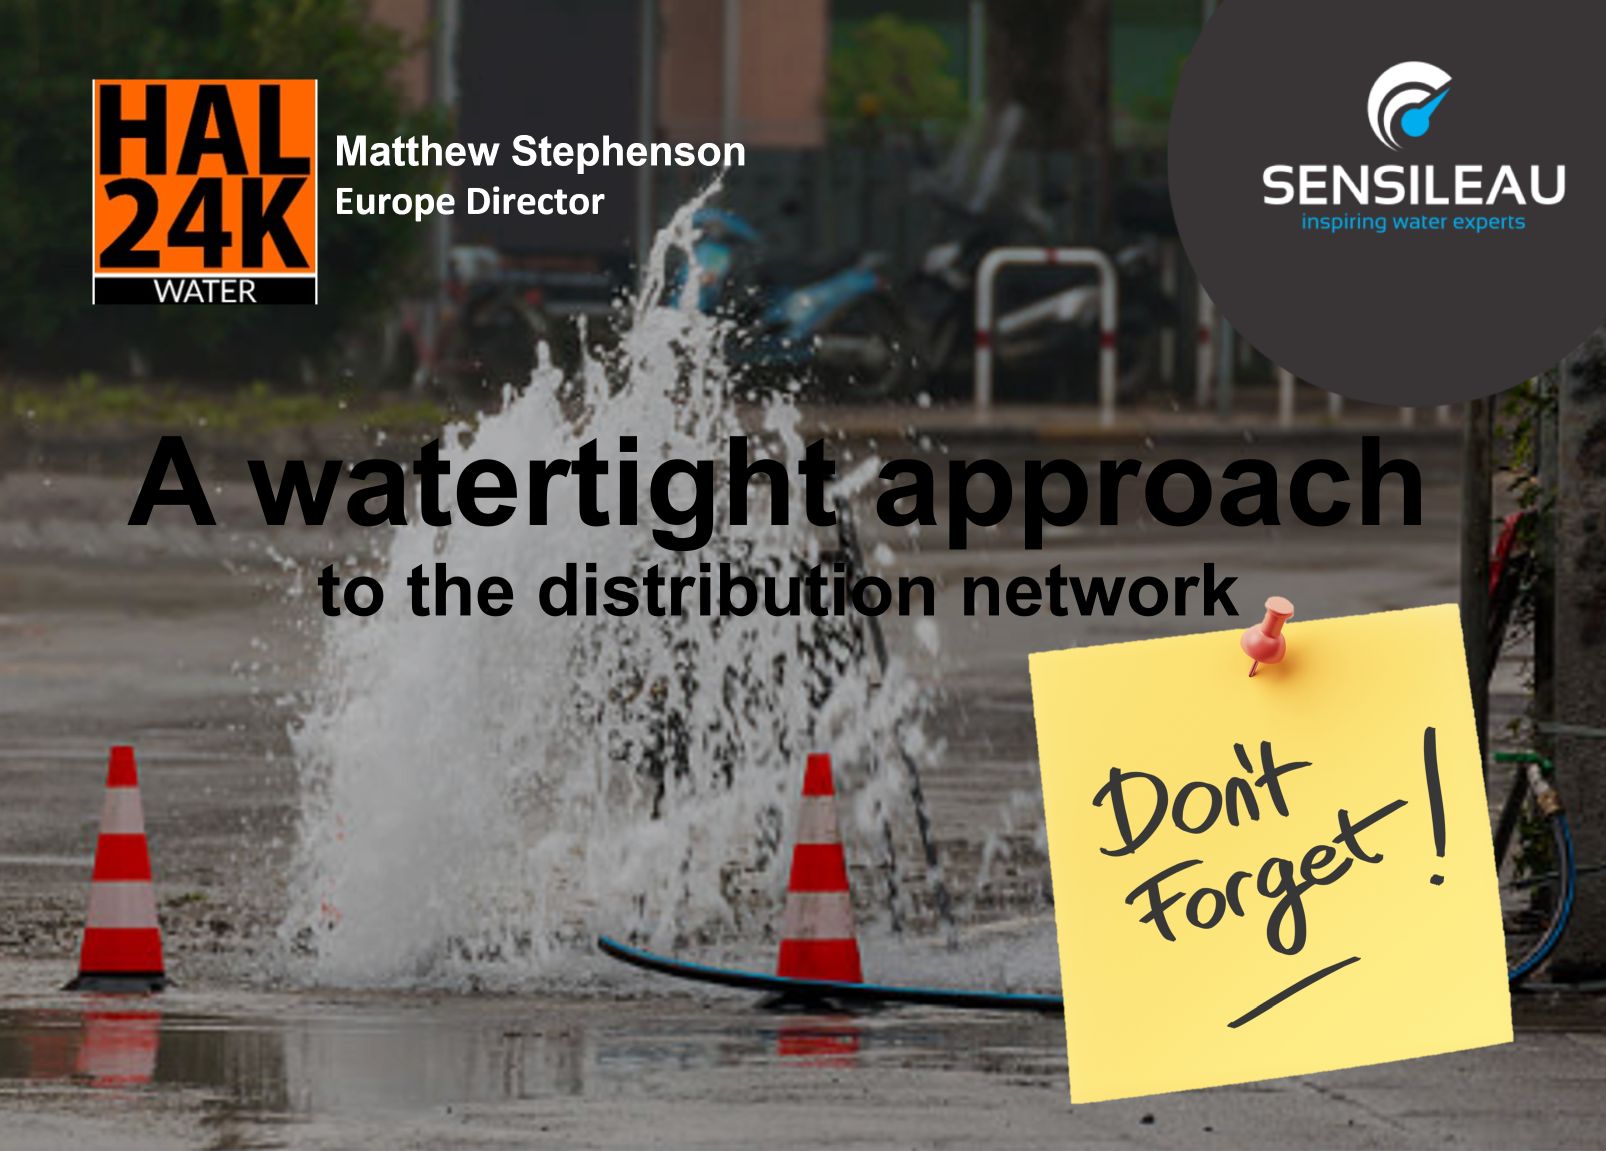 Don't forget!In Sensileau's upcoming webinar 'A Watertight Approach to the distribution network' we will be diving into the black box of the dis...